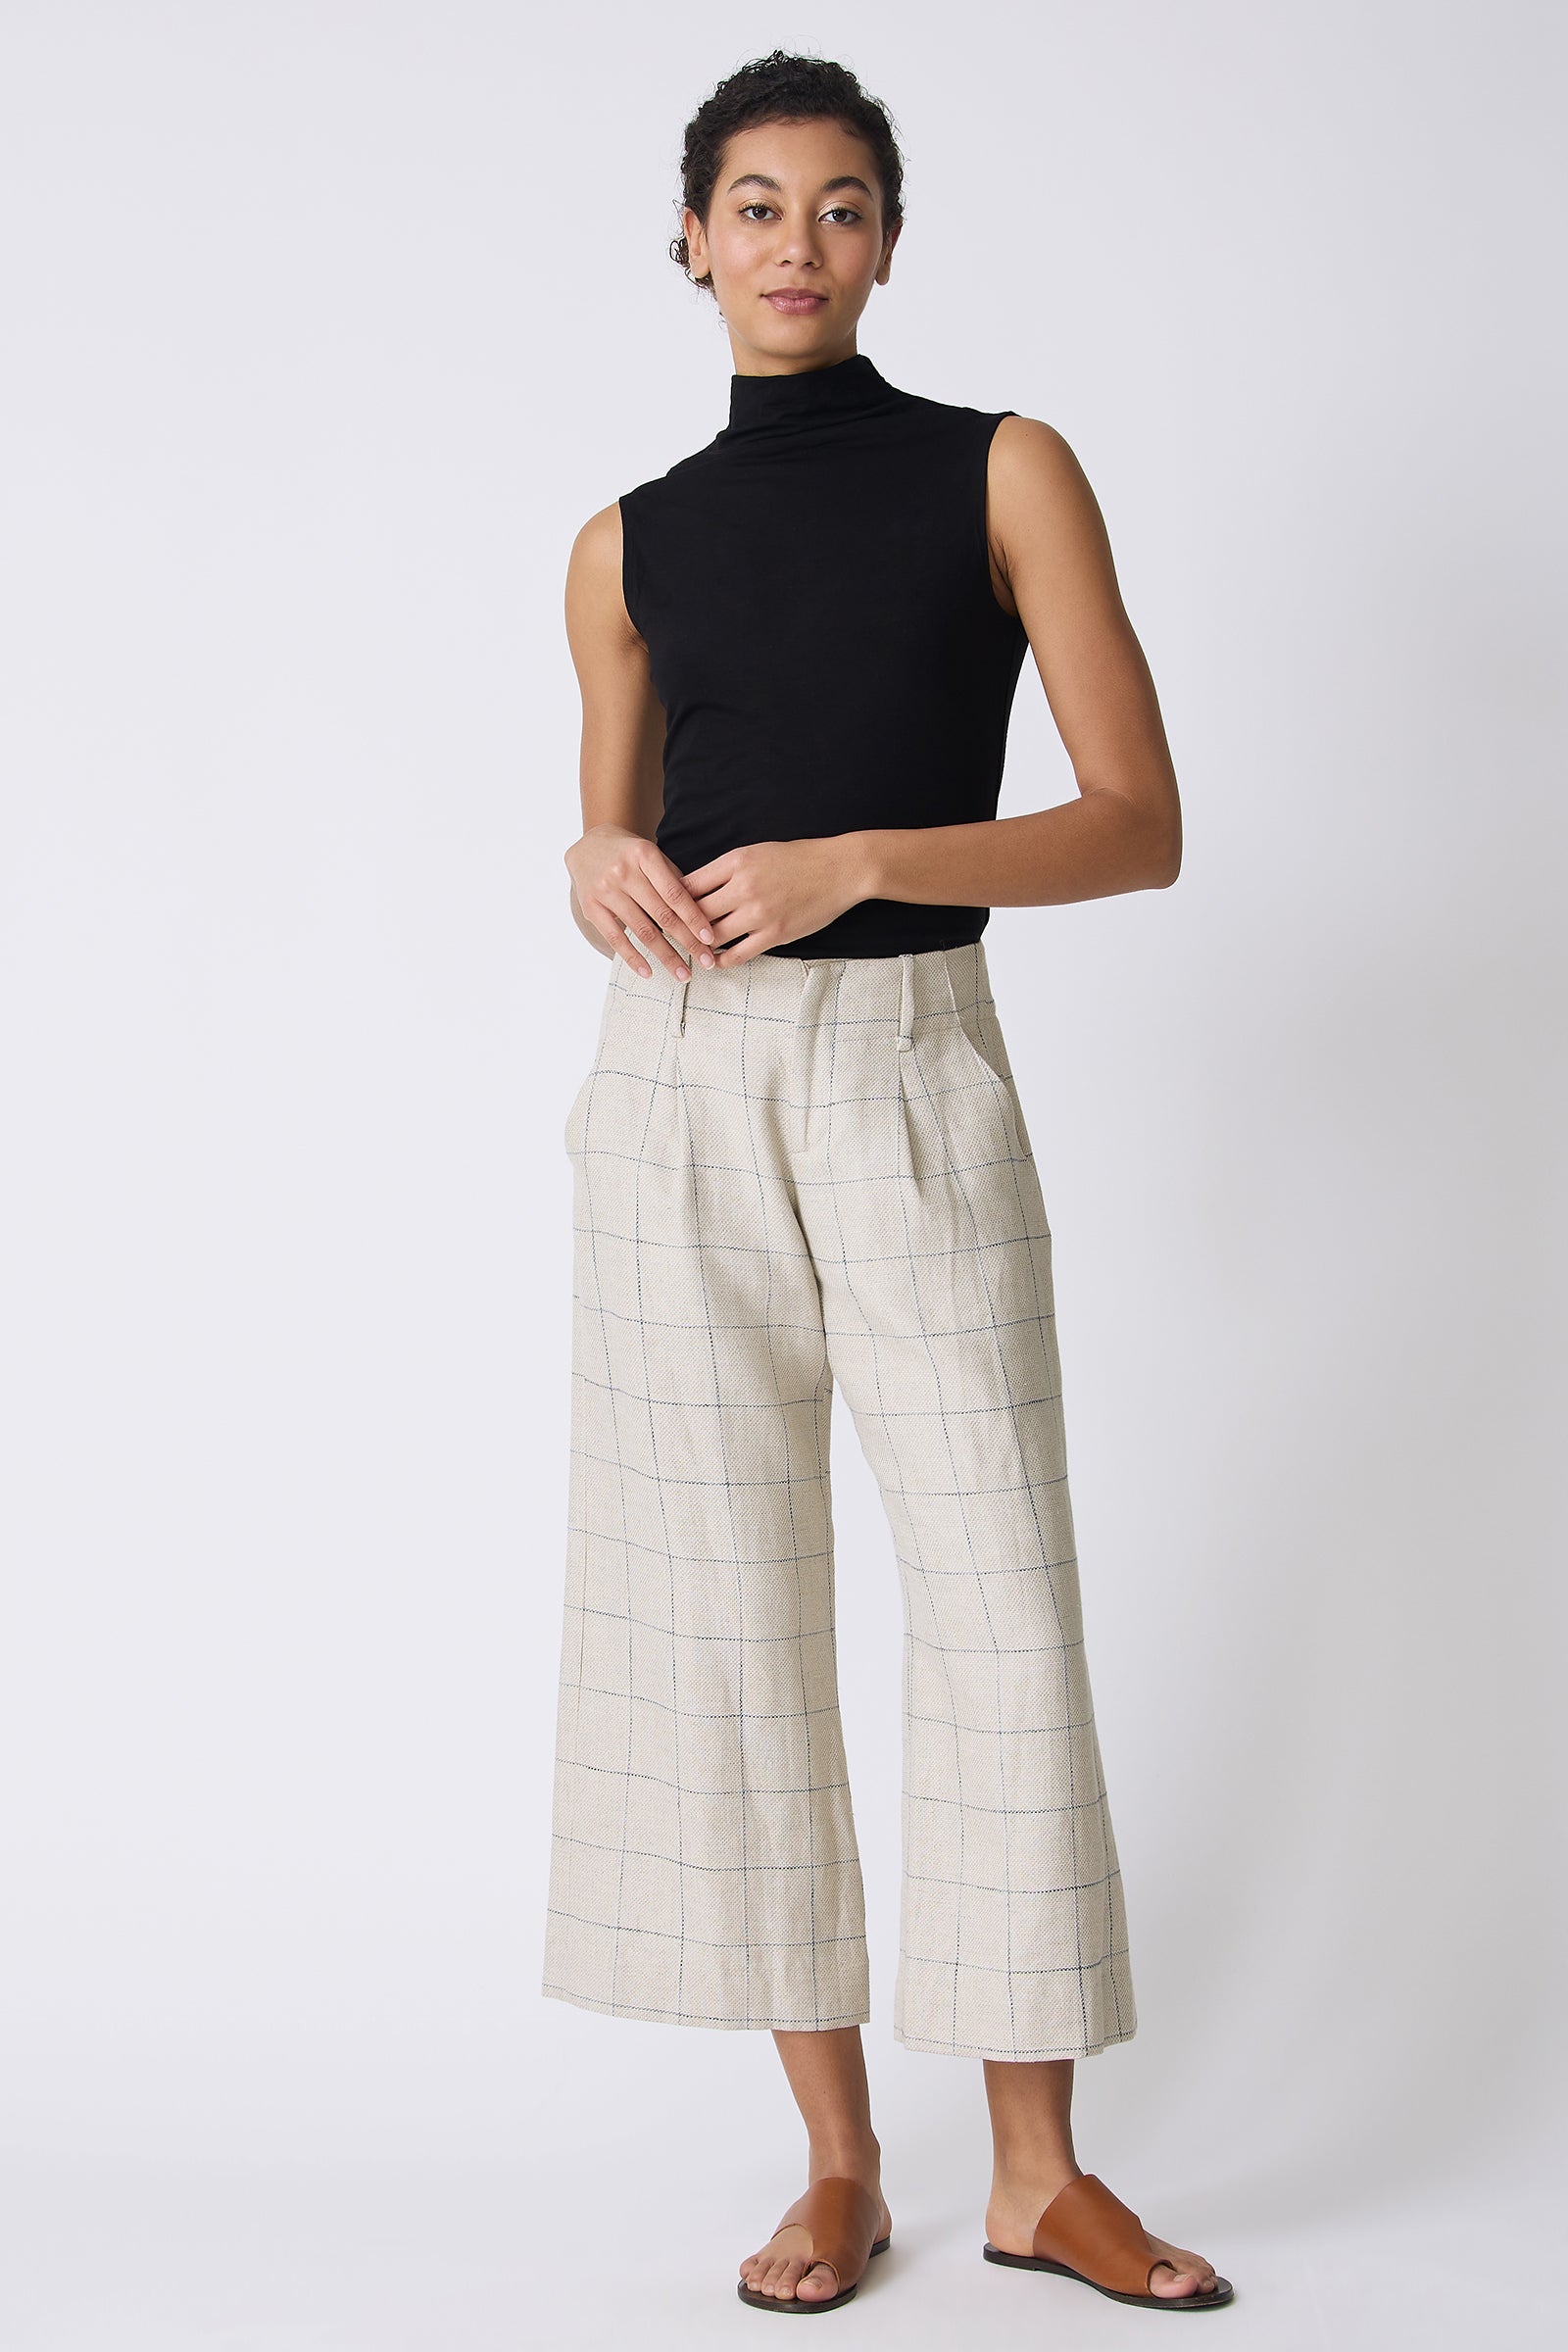 Kal Rieman Gabby Crop Pant in Windowpane on model touching hands full front view